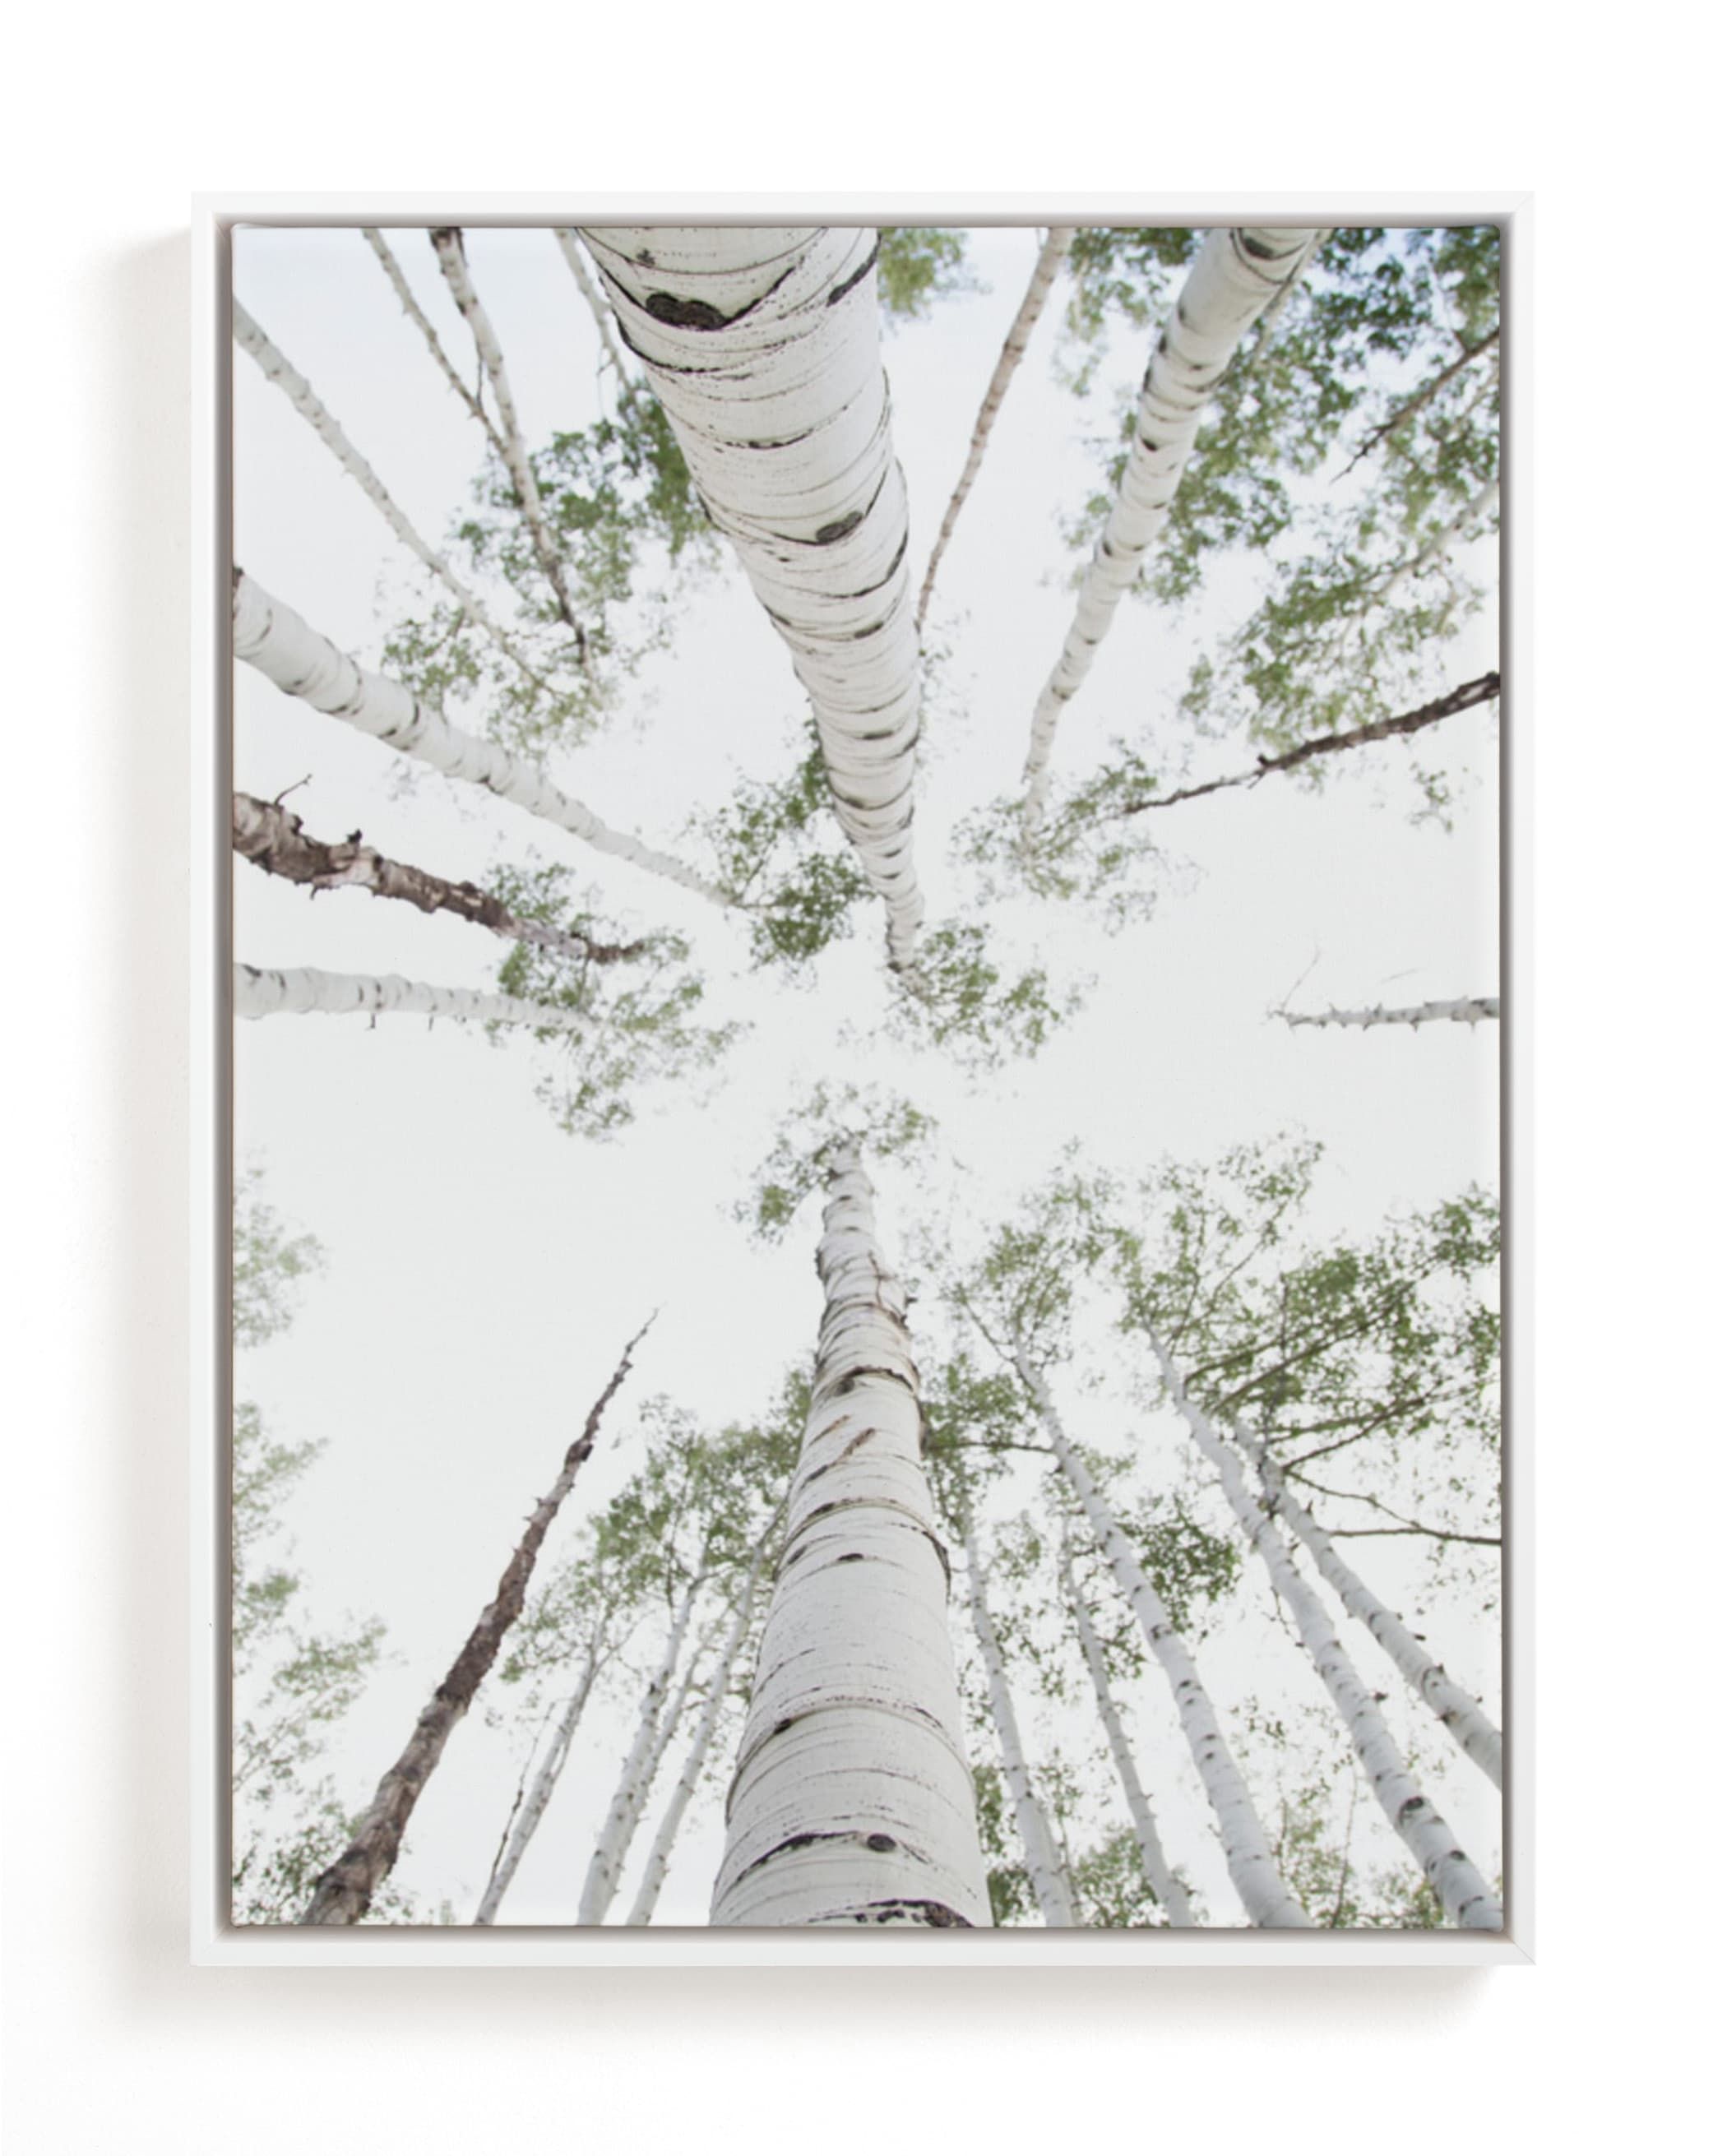 "Aspens at Altitude" - Photography Limited Edition Art Print by Kaleb Nimz. | Minted